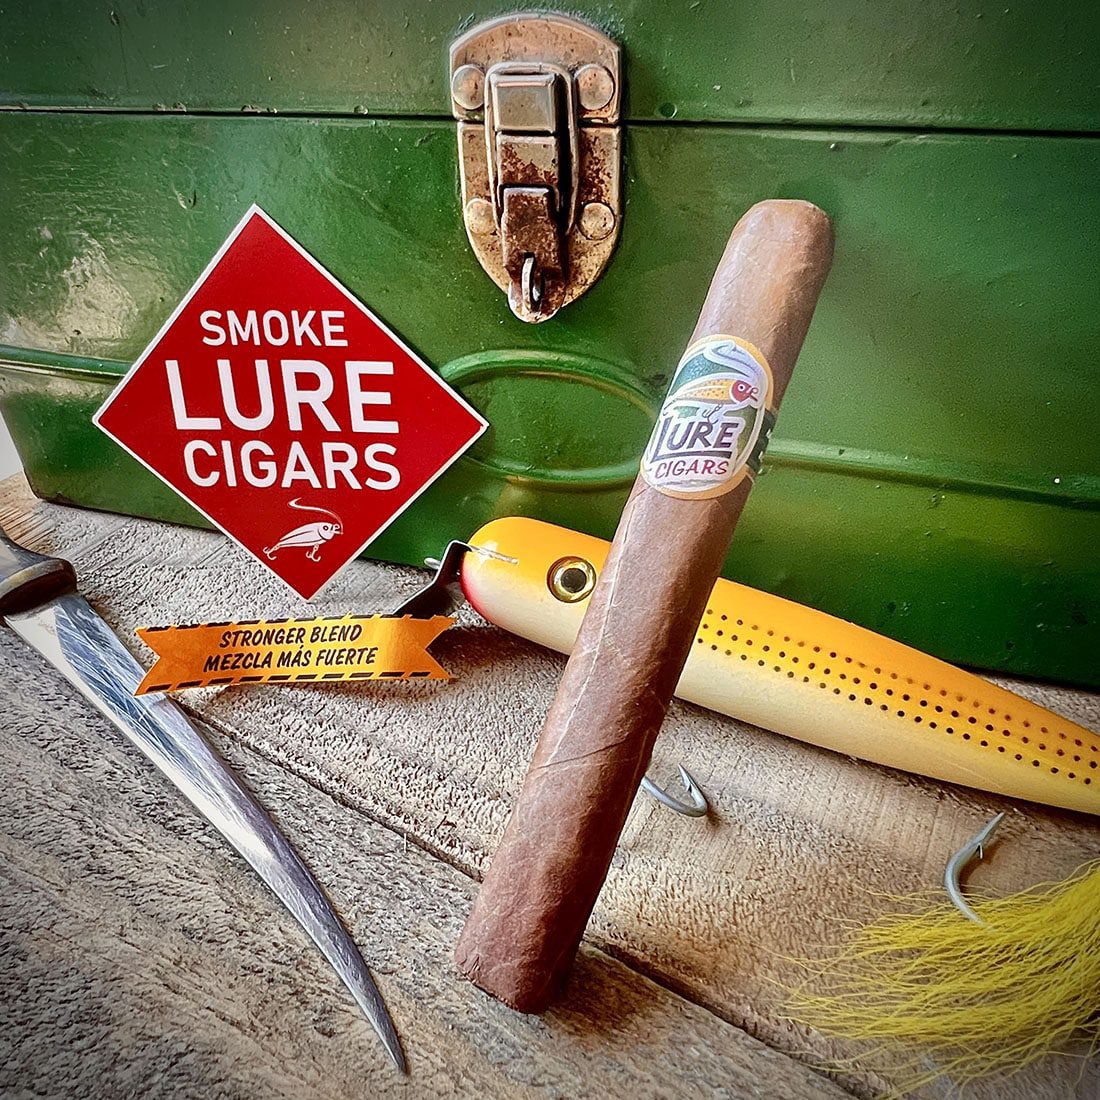 lure-cigars-introduces-“the-mean-jean”-in-habano-core-line